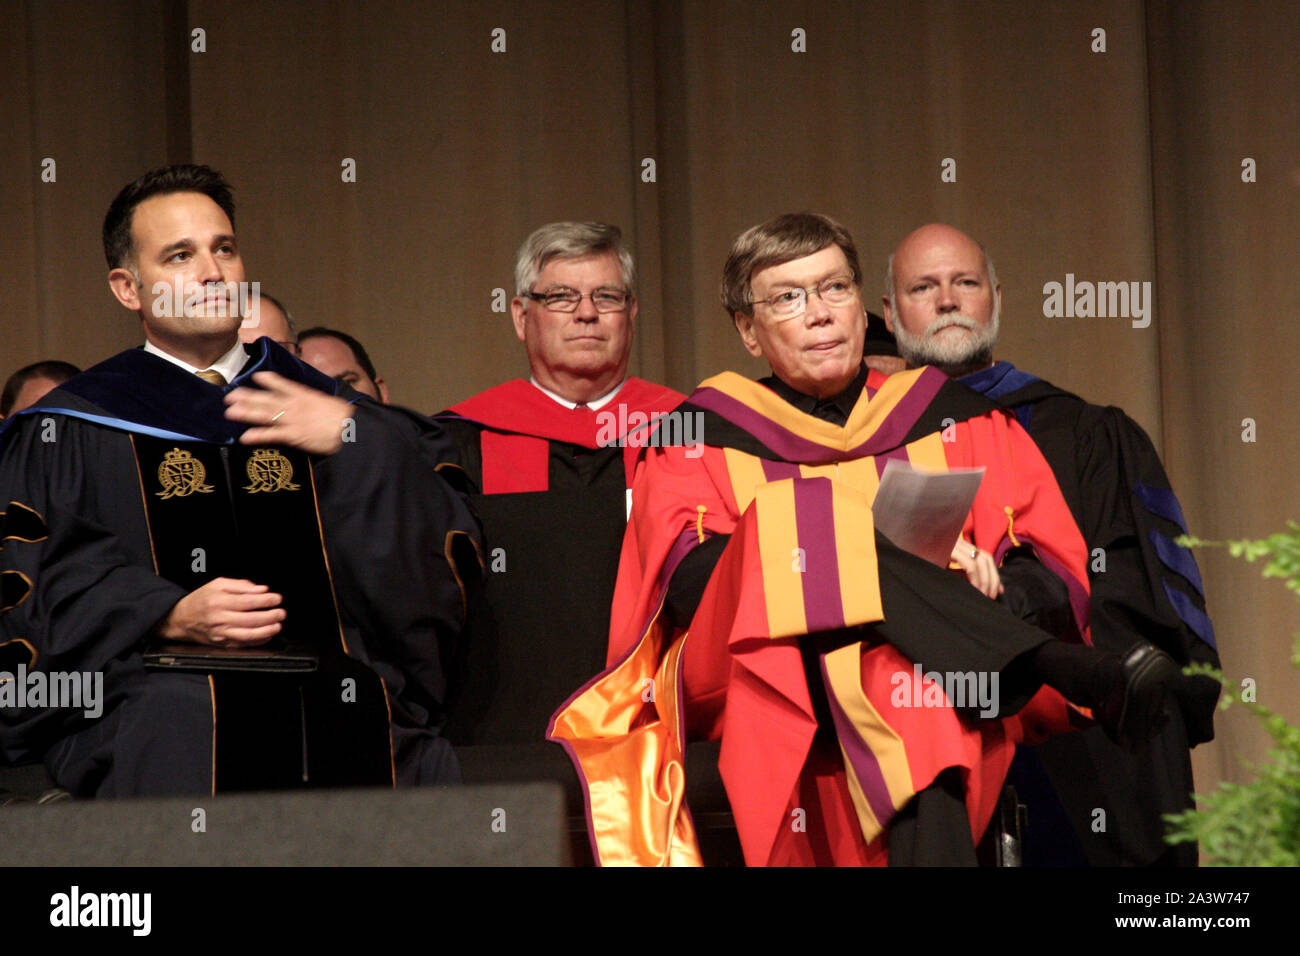 Dr. Ben Gutierrez and Dr. Ed Hindson (first row) during event at Liberty University in Lynchburg, VA, USA. Stock Photo